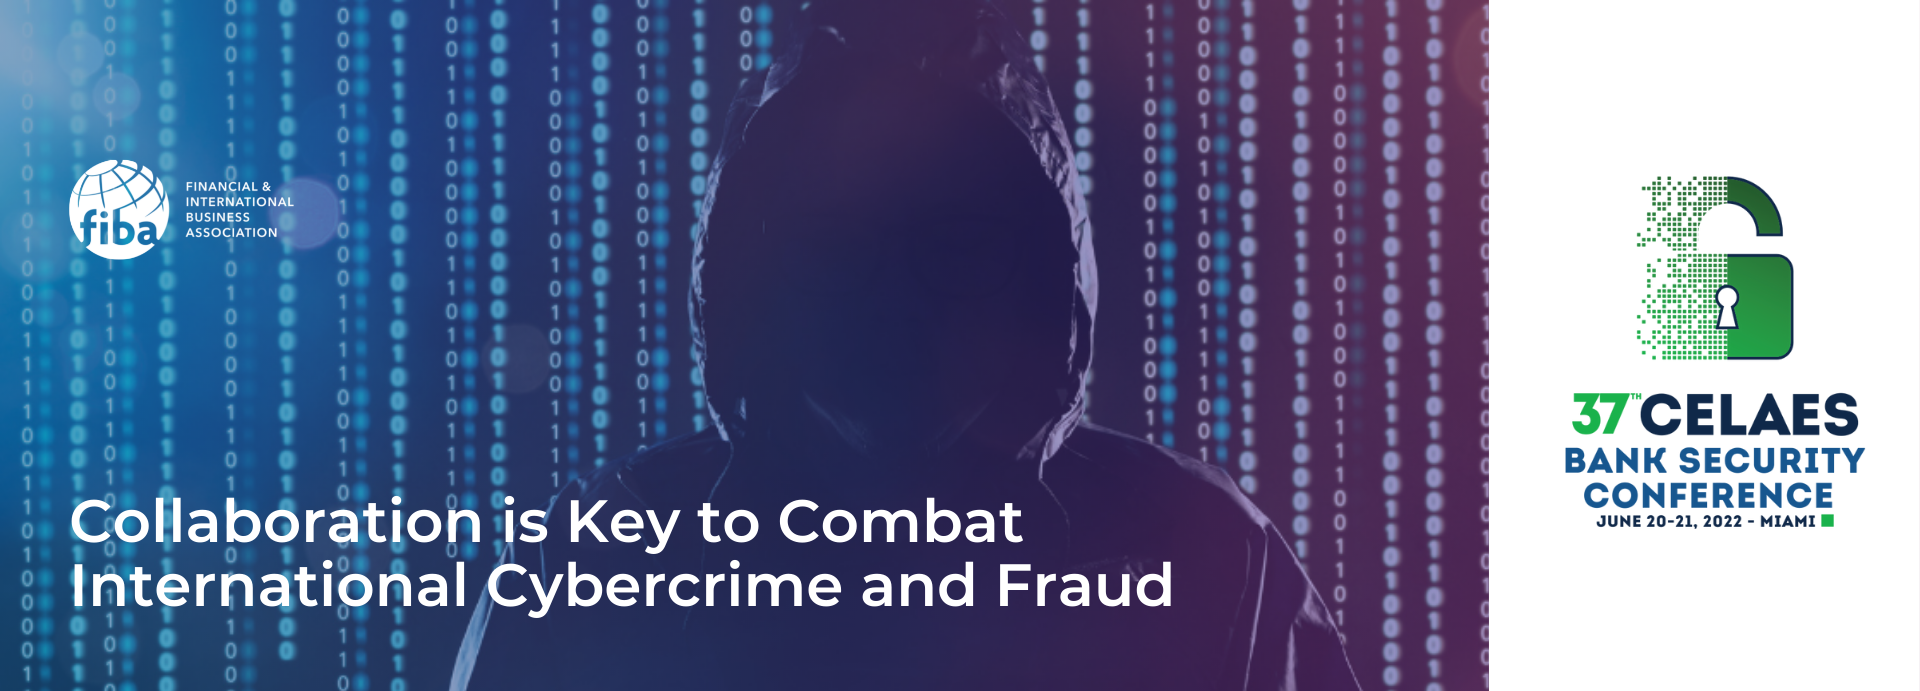 Collaboration is Key to Combat International Cybercrime and Fraud